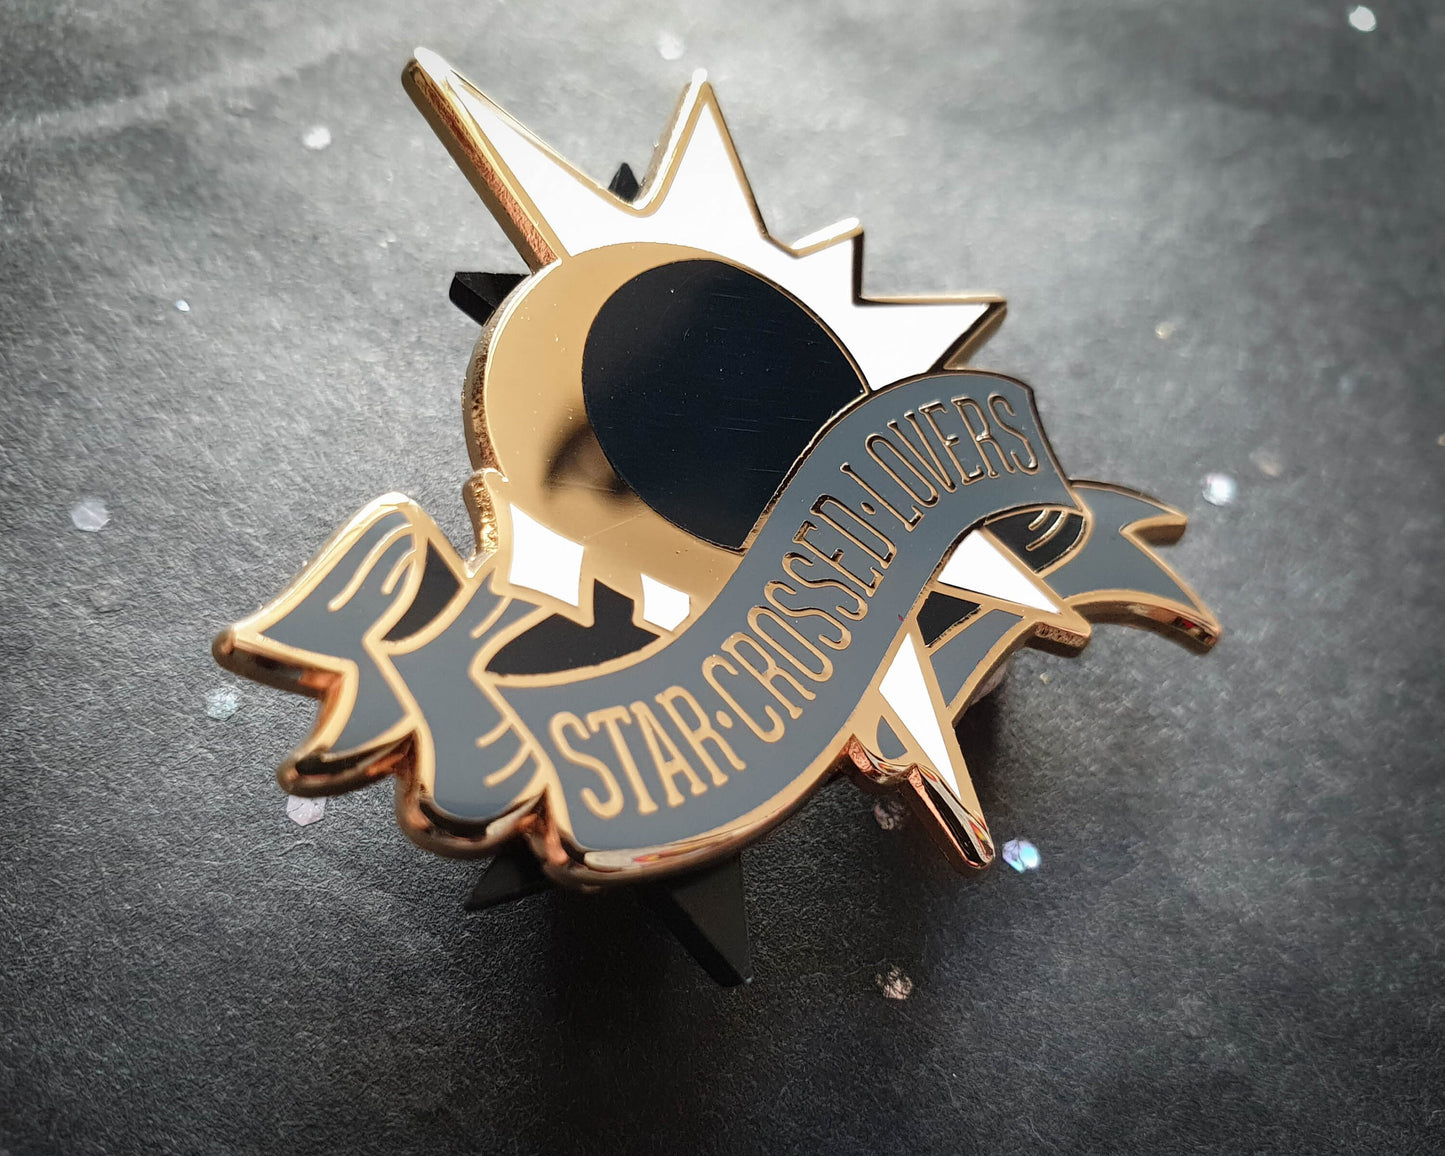 The Eclipse - Hard Enamel Pin - Star-crossed Lovers (Collaboration by Astermorn and Annadrawsstuff)